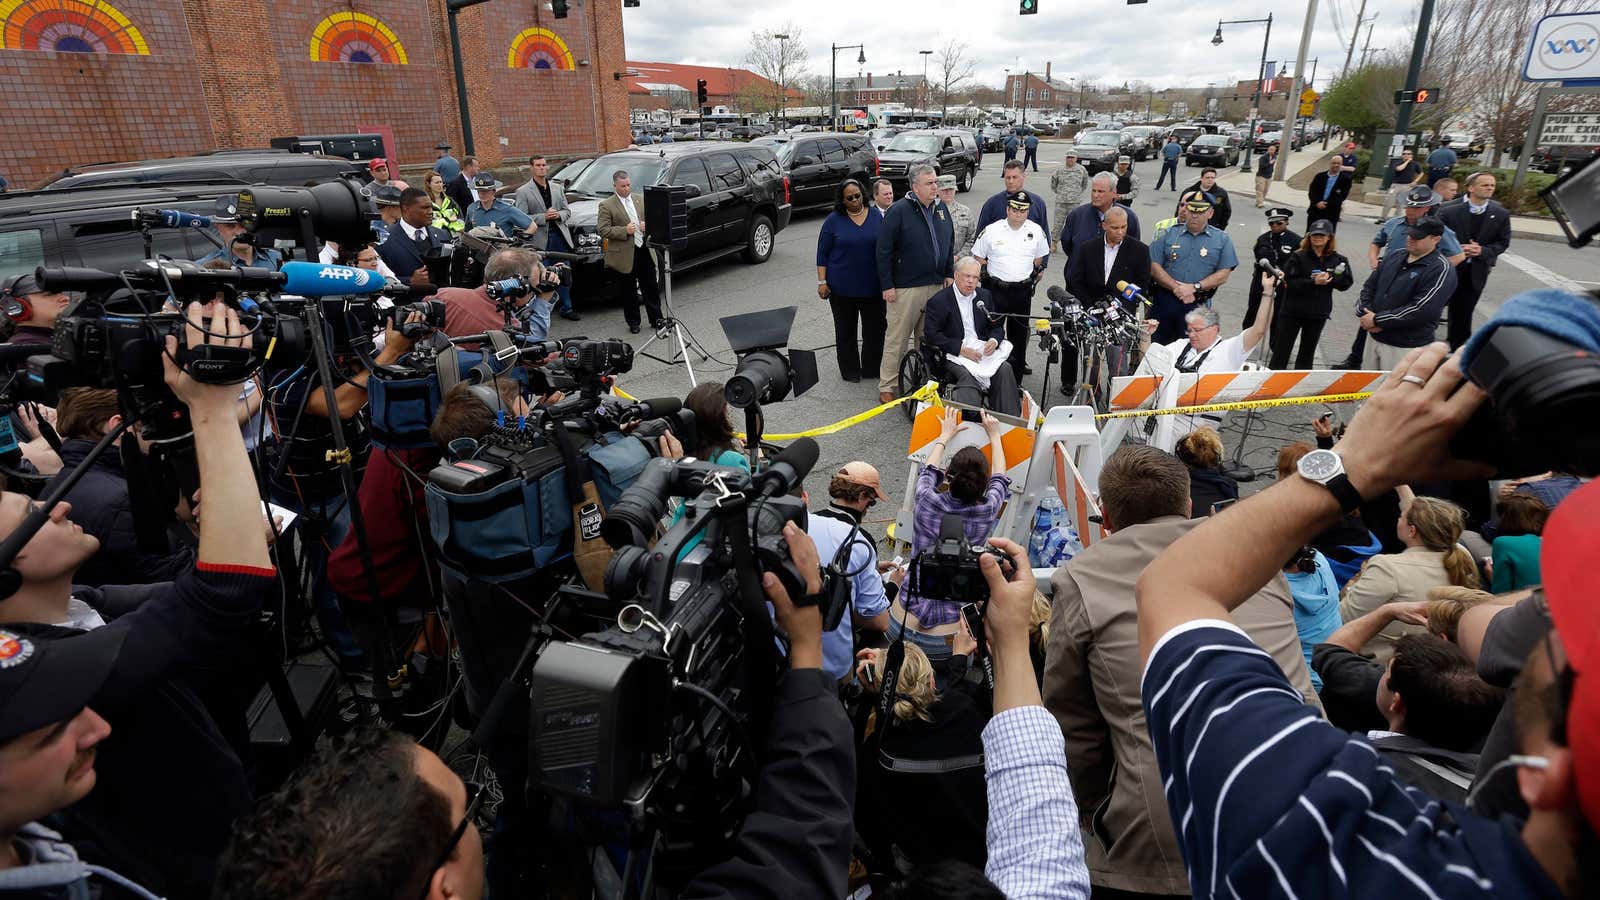 Massachusetts governor Deval Patrick speaking to the media during the manhunt in Watertown.